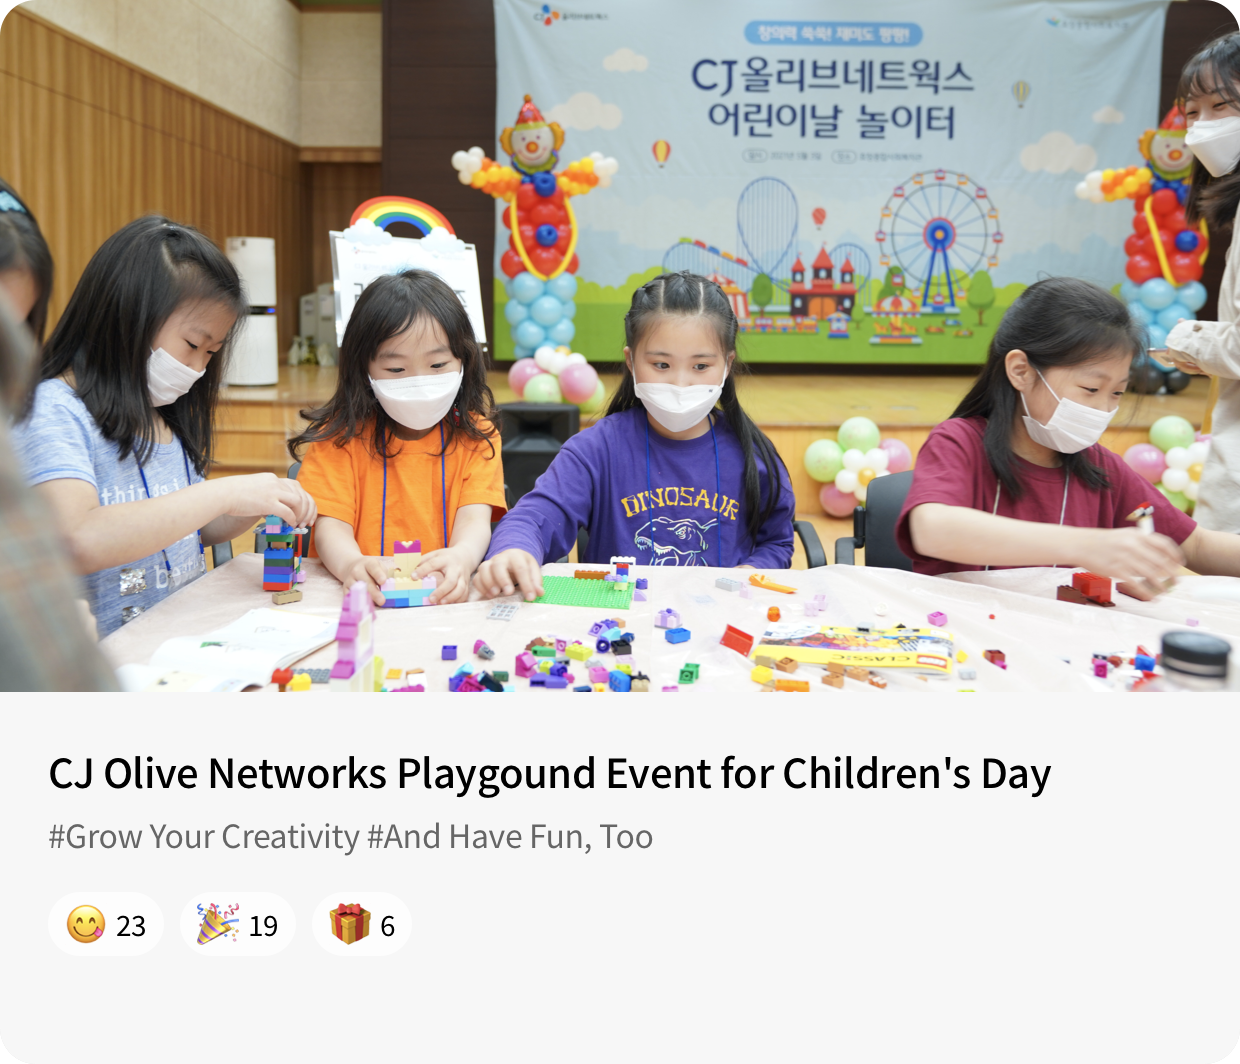 CJ OliveNetworks Playgound Event for Children's Day